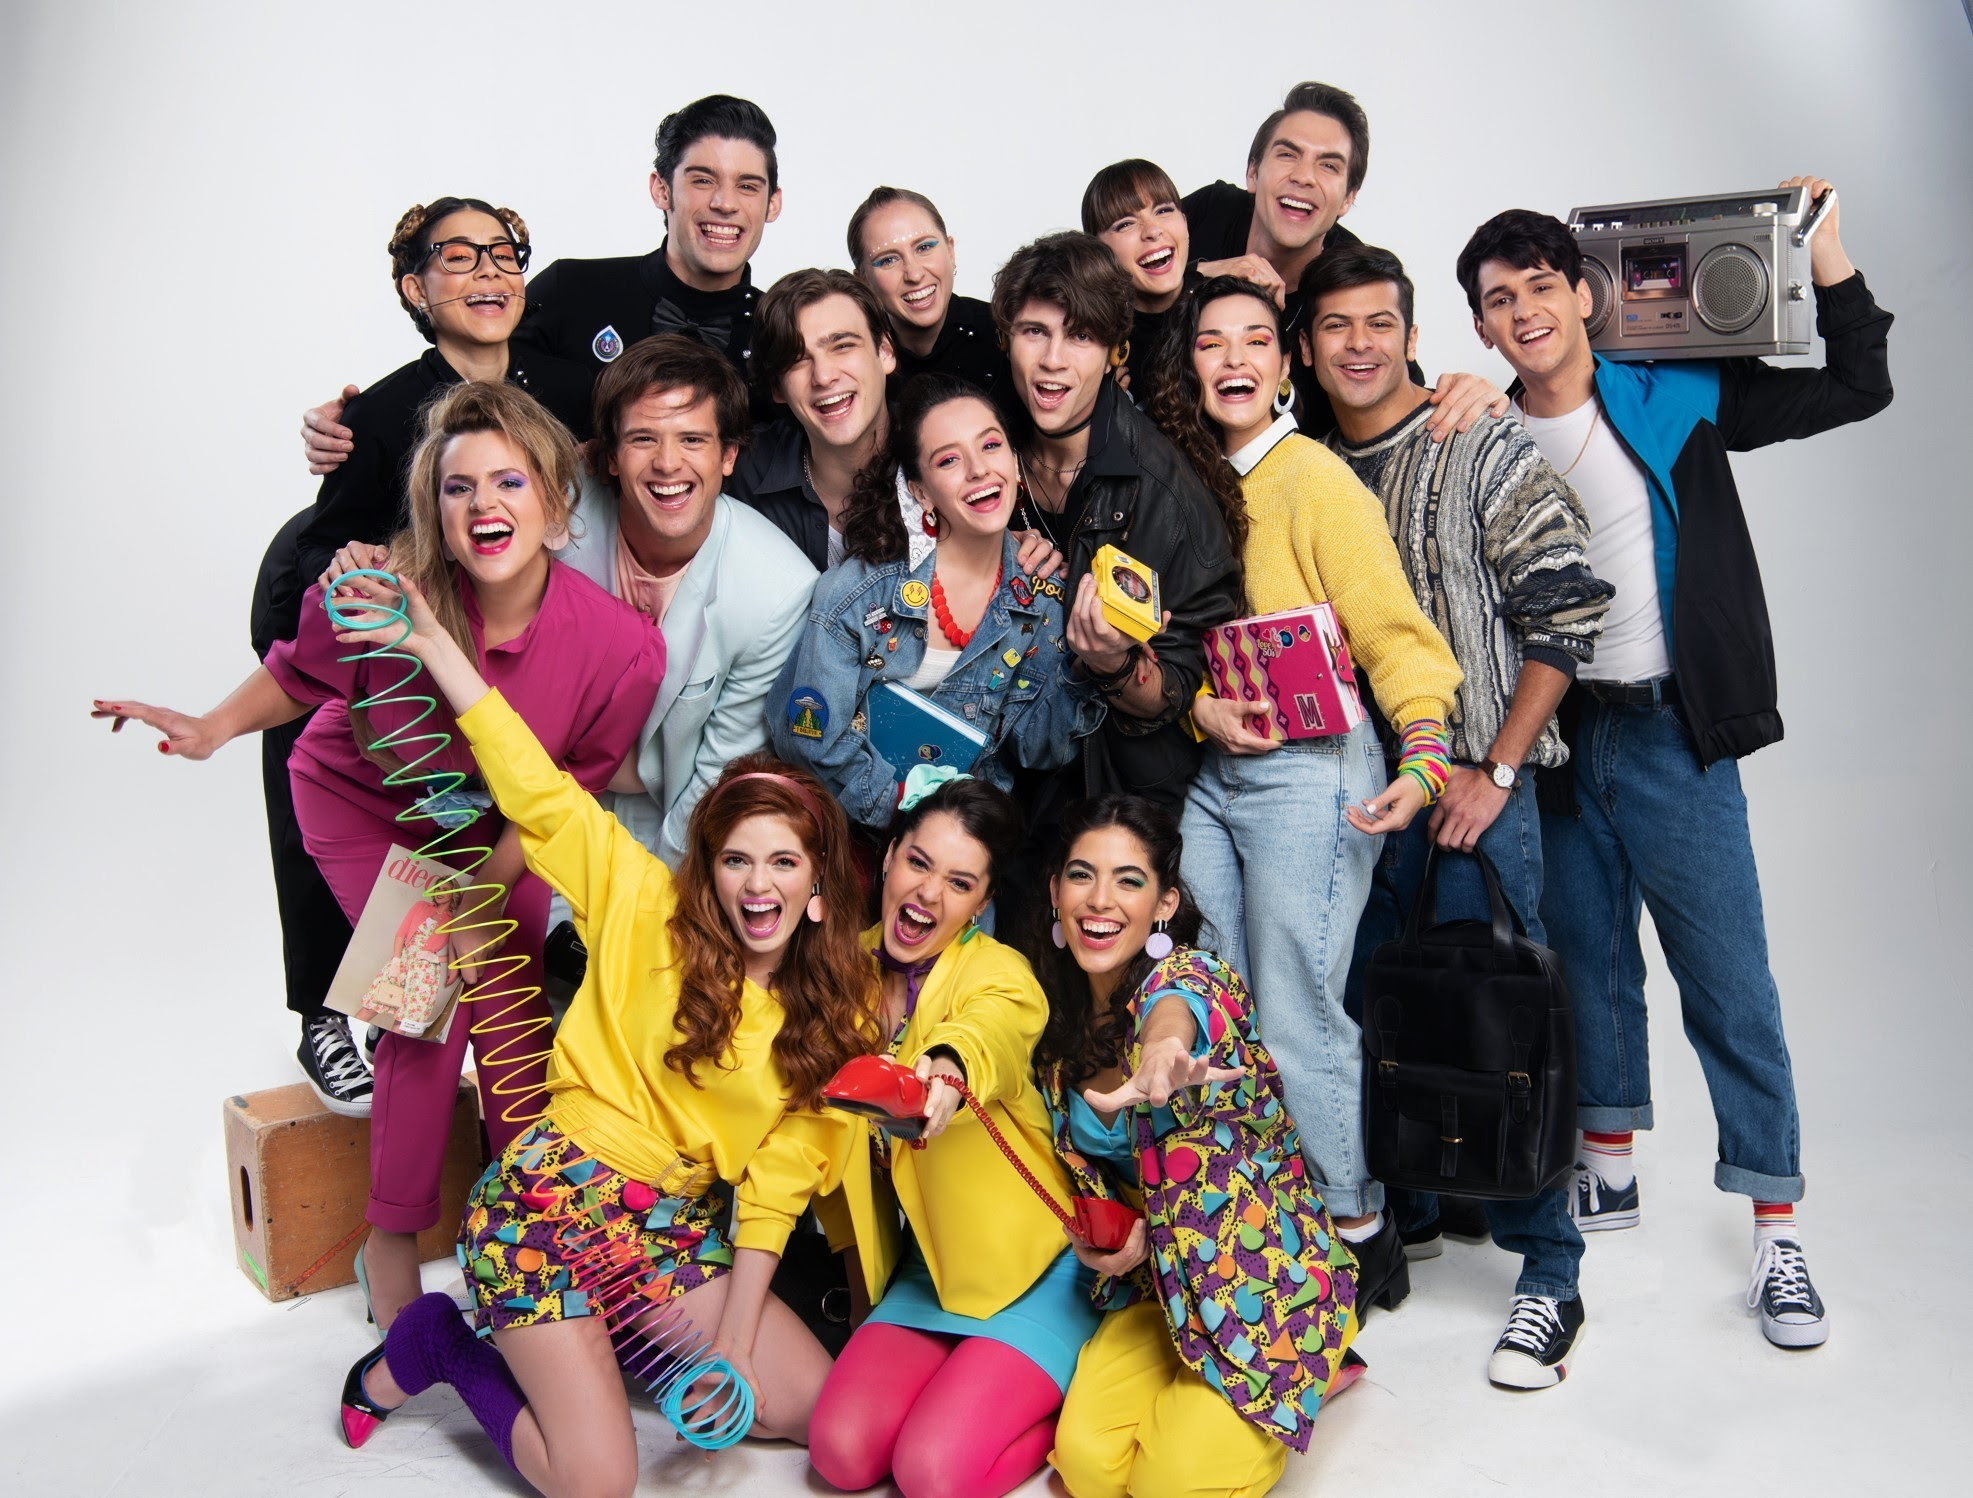 NickALive!: Nickelodeon Premieres 'Club 57' Season 2 in Latin America and  Brazil [New Episodes of September 13]